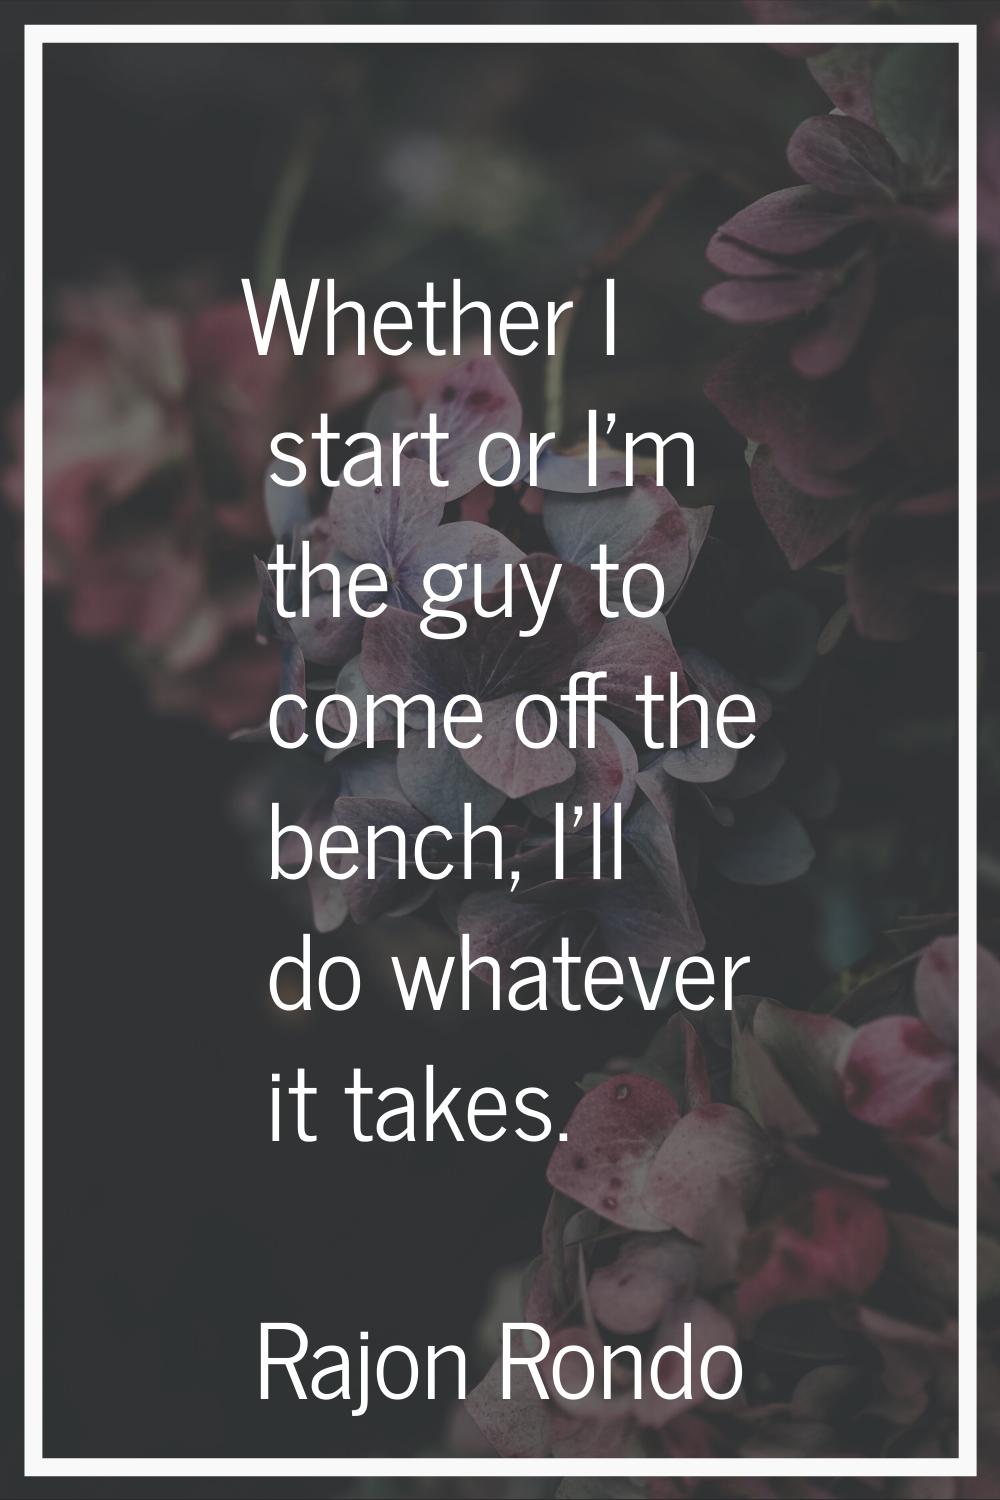 Whether I start or I'm the guy to come off the bench, I'll do whatever it takes.